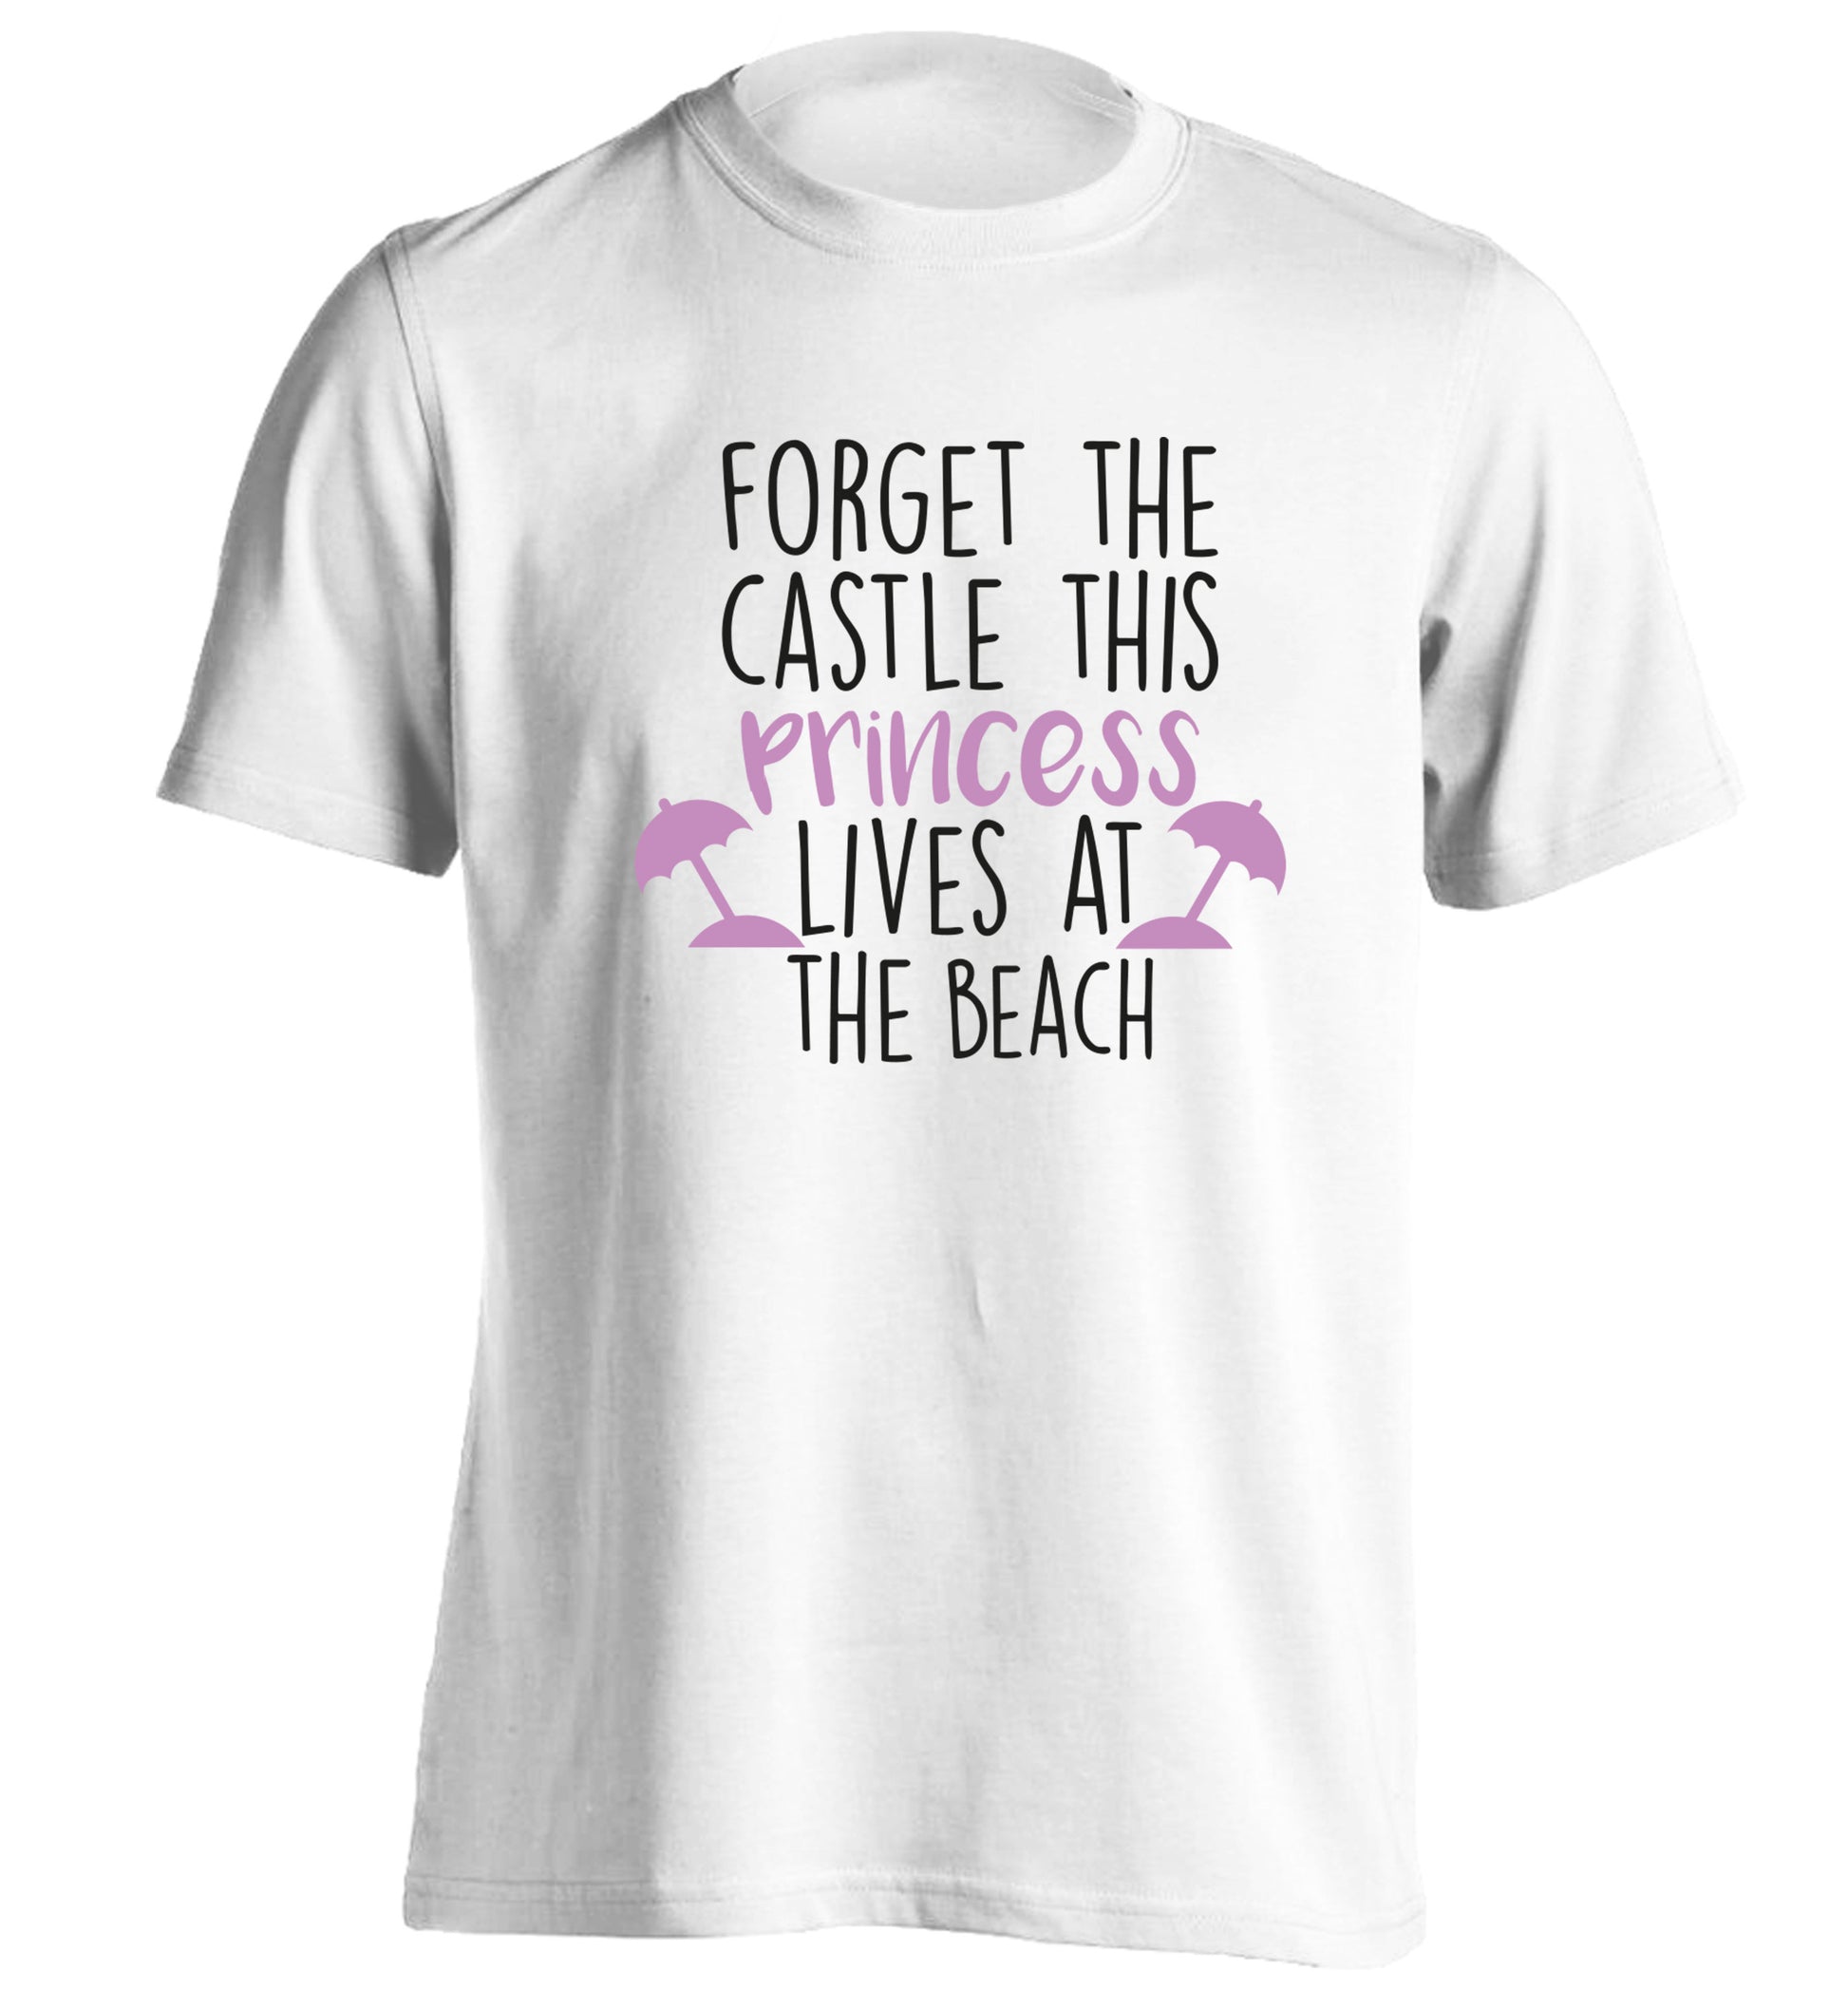 Forget the castle this princess lives at the beach adults unisex white Tshirt 2XL